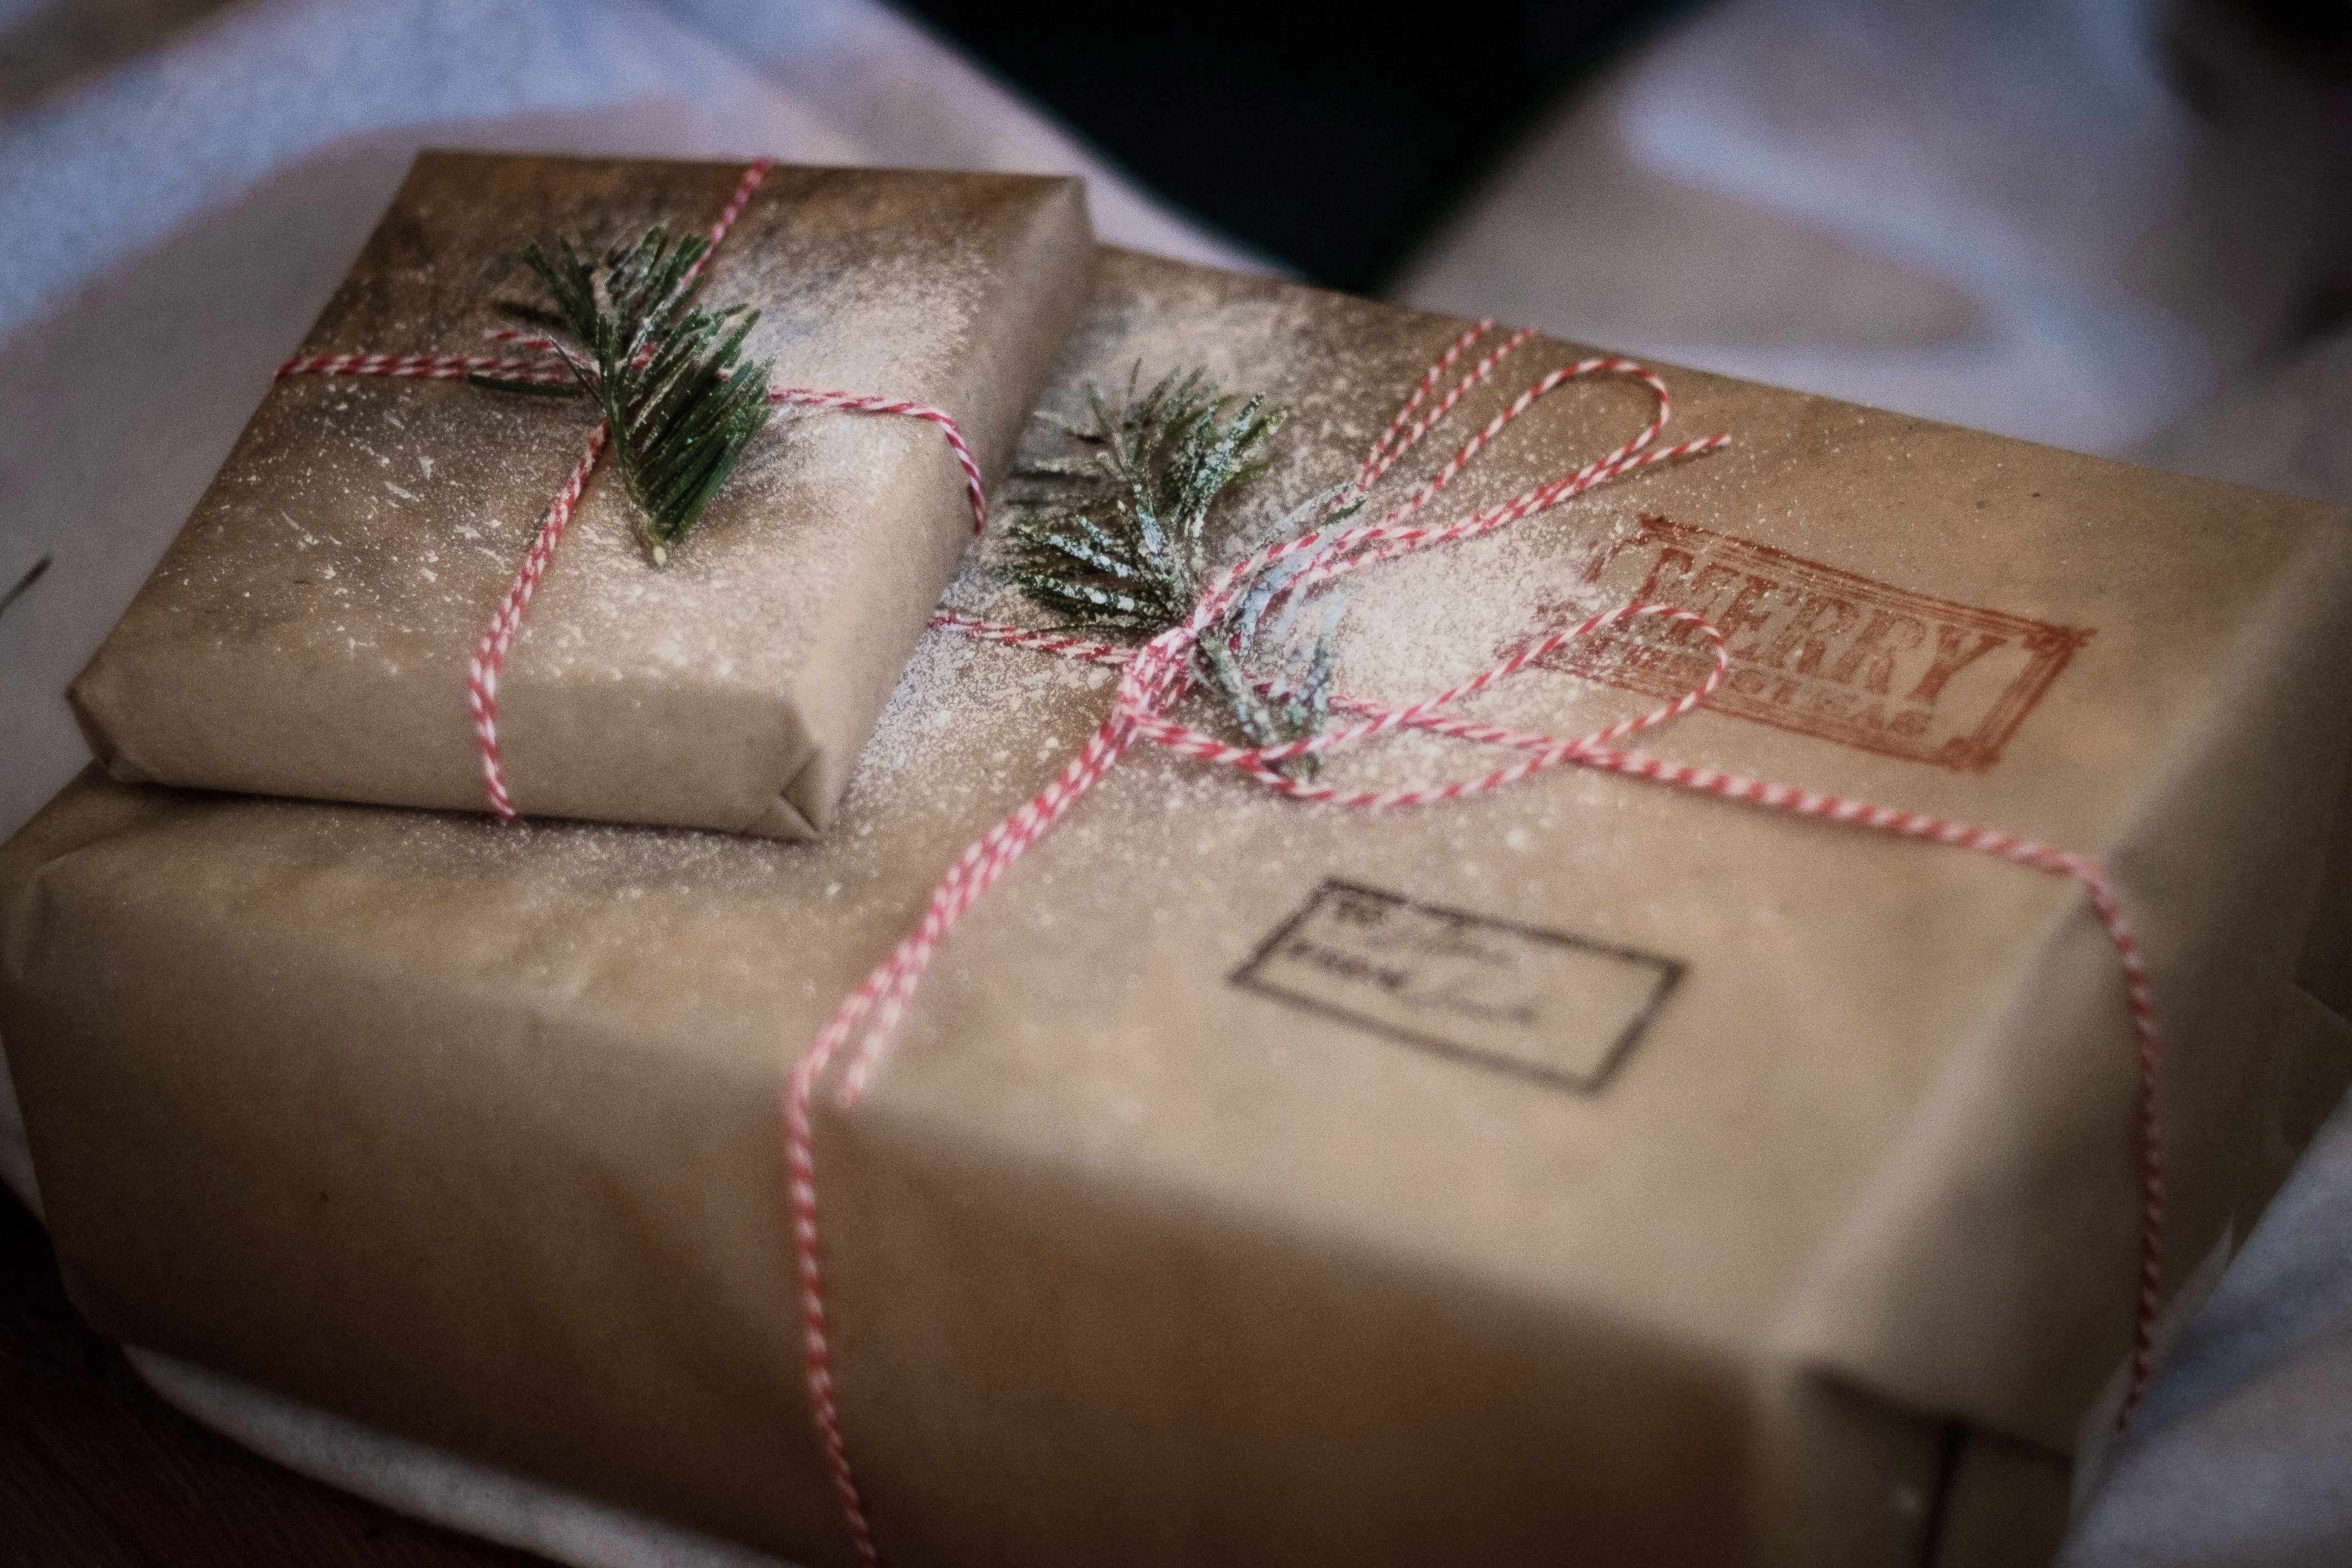 Brown paper packages to symbolize A Checklist for the Holidays and Jesus